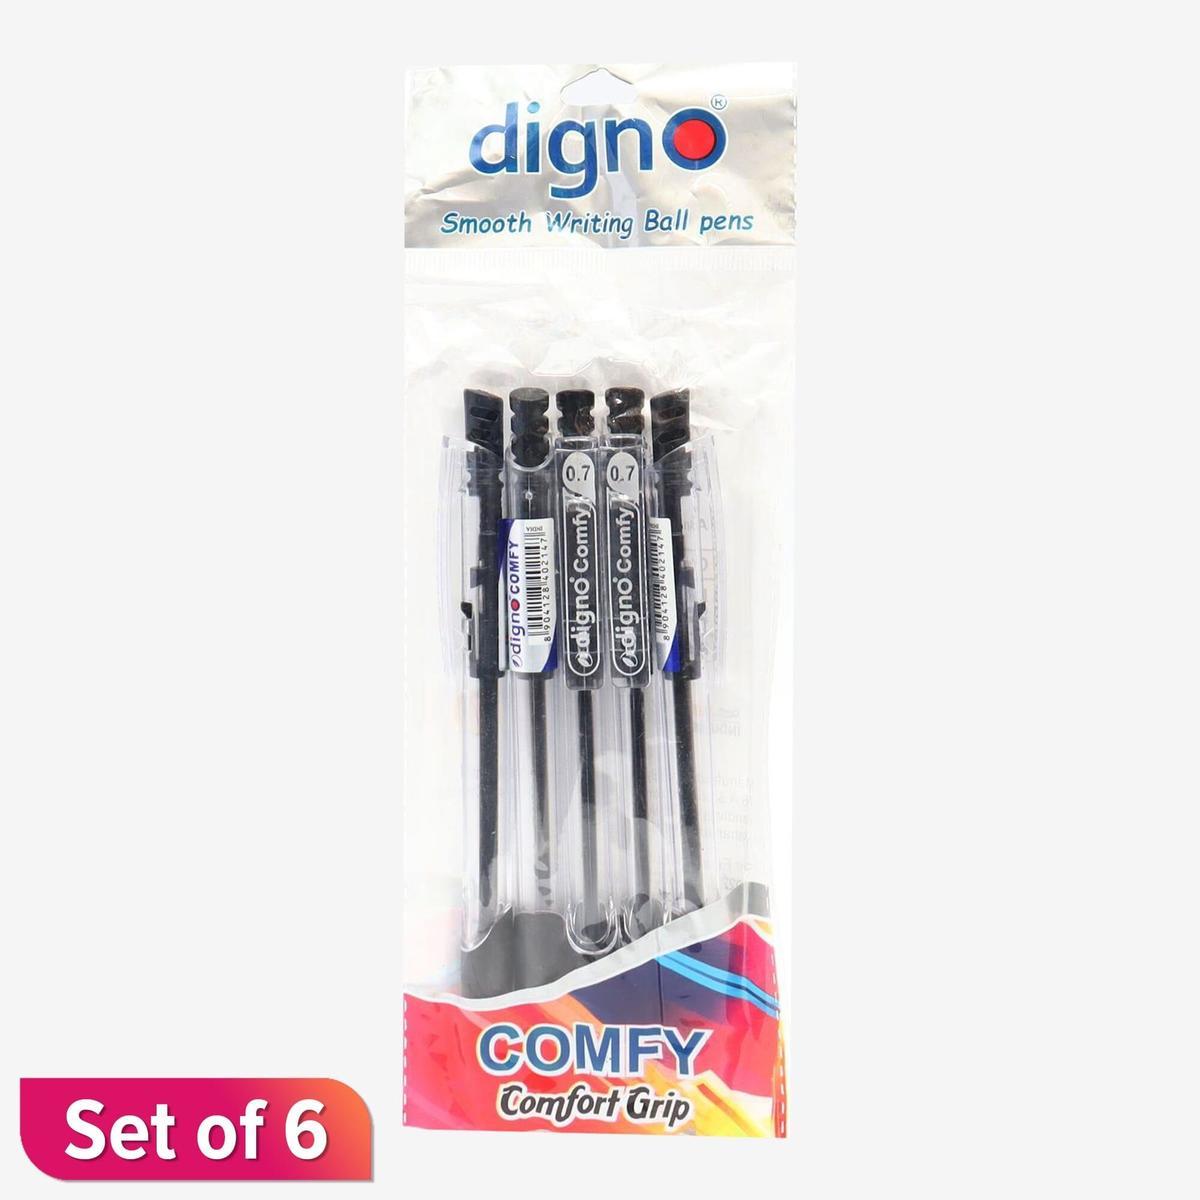 digno smooth writing ball pen black ink